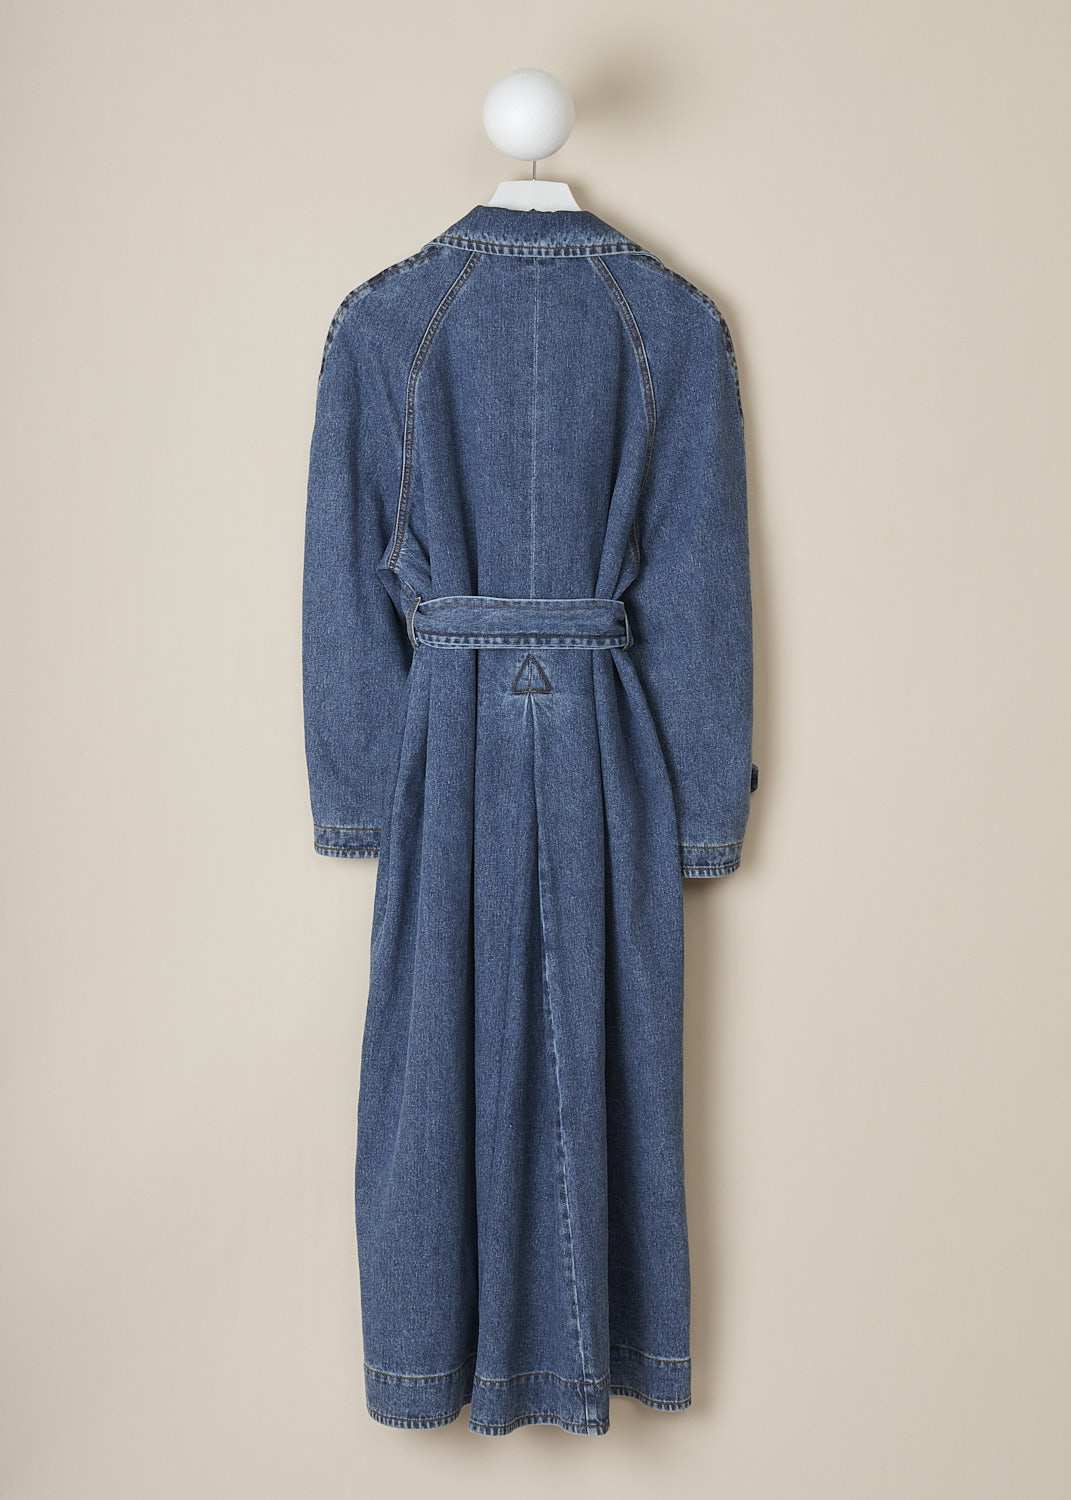 CHLOÃ‰, LONG DUSKY BLUE DENIM COAT, CHC23SDM2716740X_DUSKY_BLUE, Blue, Back, This long dusky blue denim trench coat has a notched lapel. The coat has a concealed front button closure and a matching fabric belt to cinch in the waist. The long sleeves have sleeve straps. The coat has slanted pockets. In the back, the coat has a centre kick pleat.

